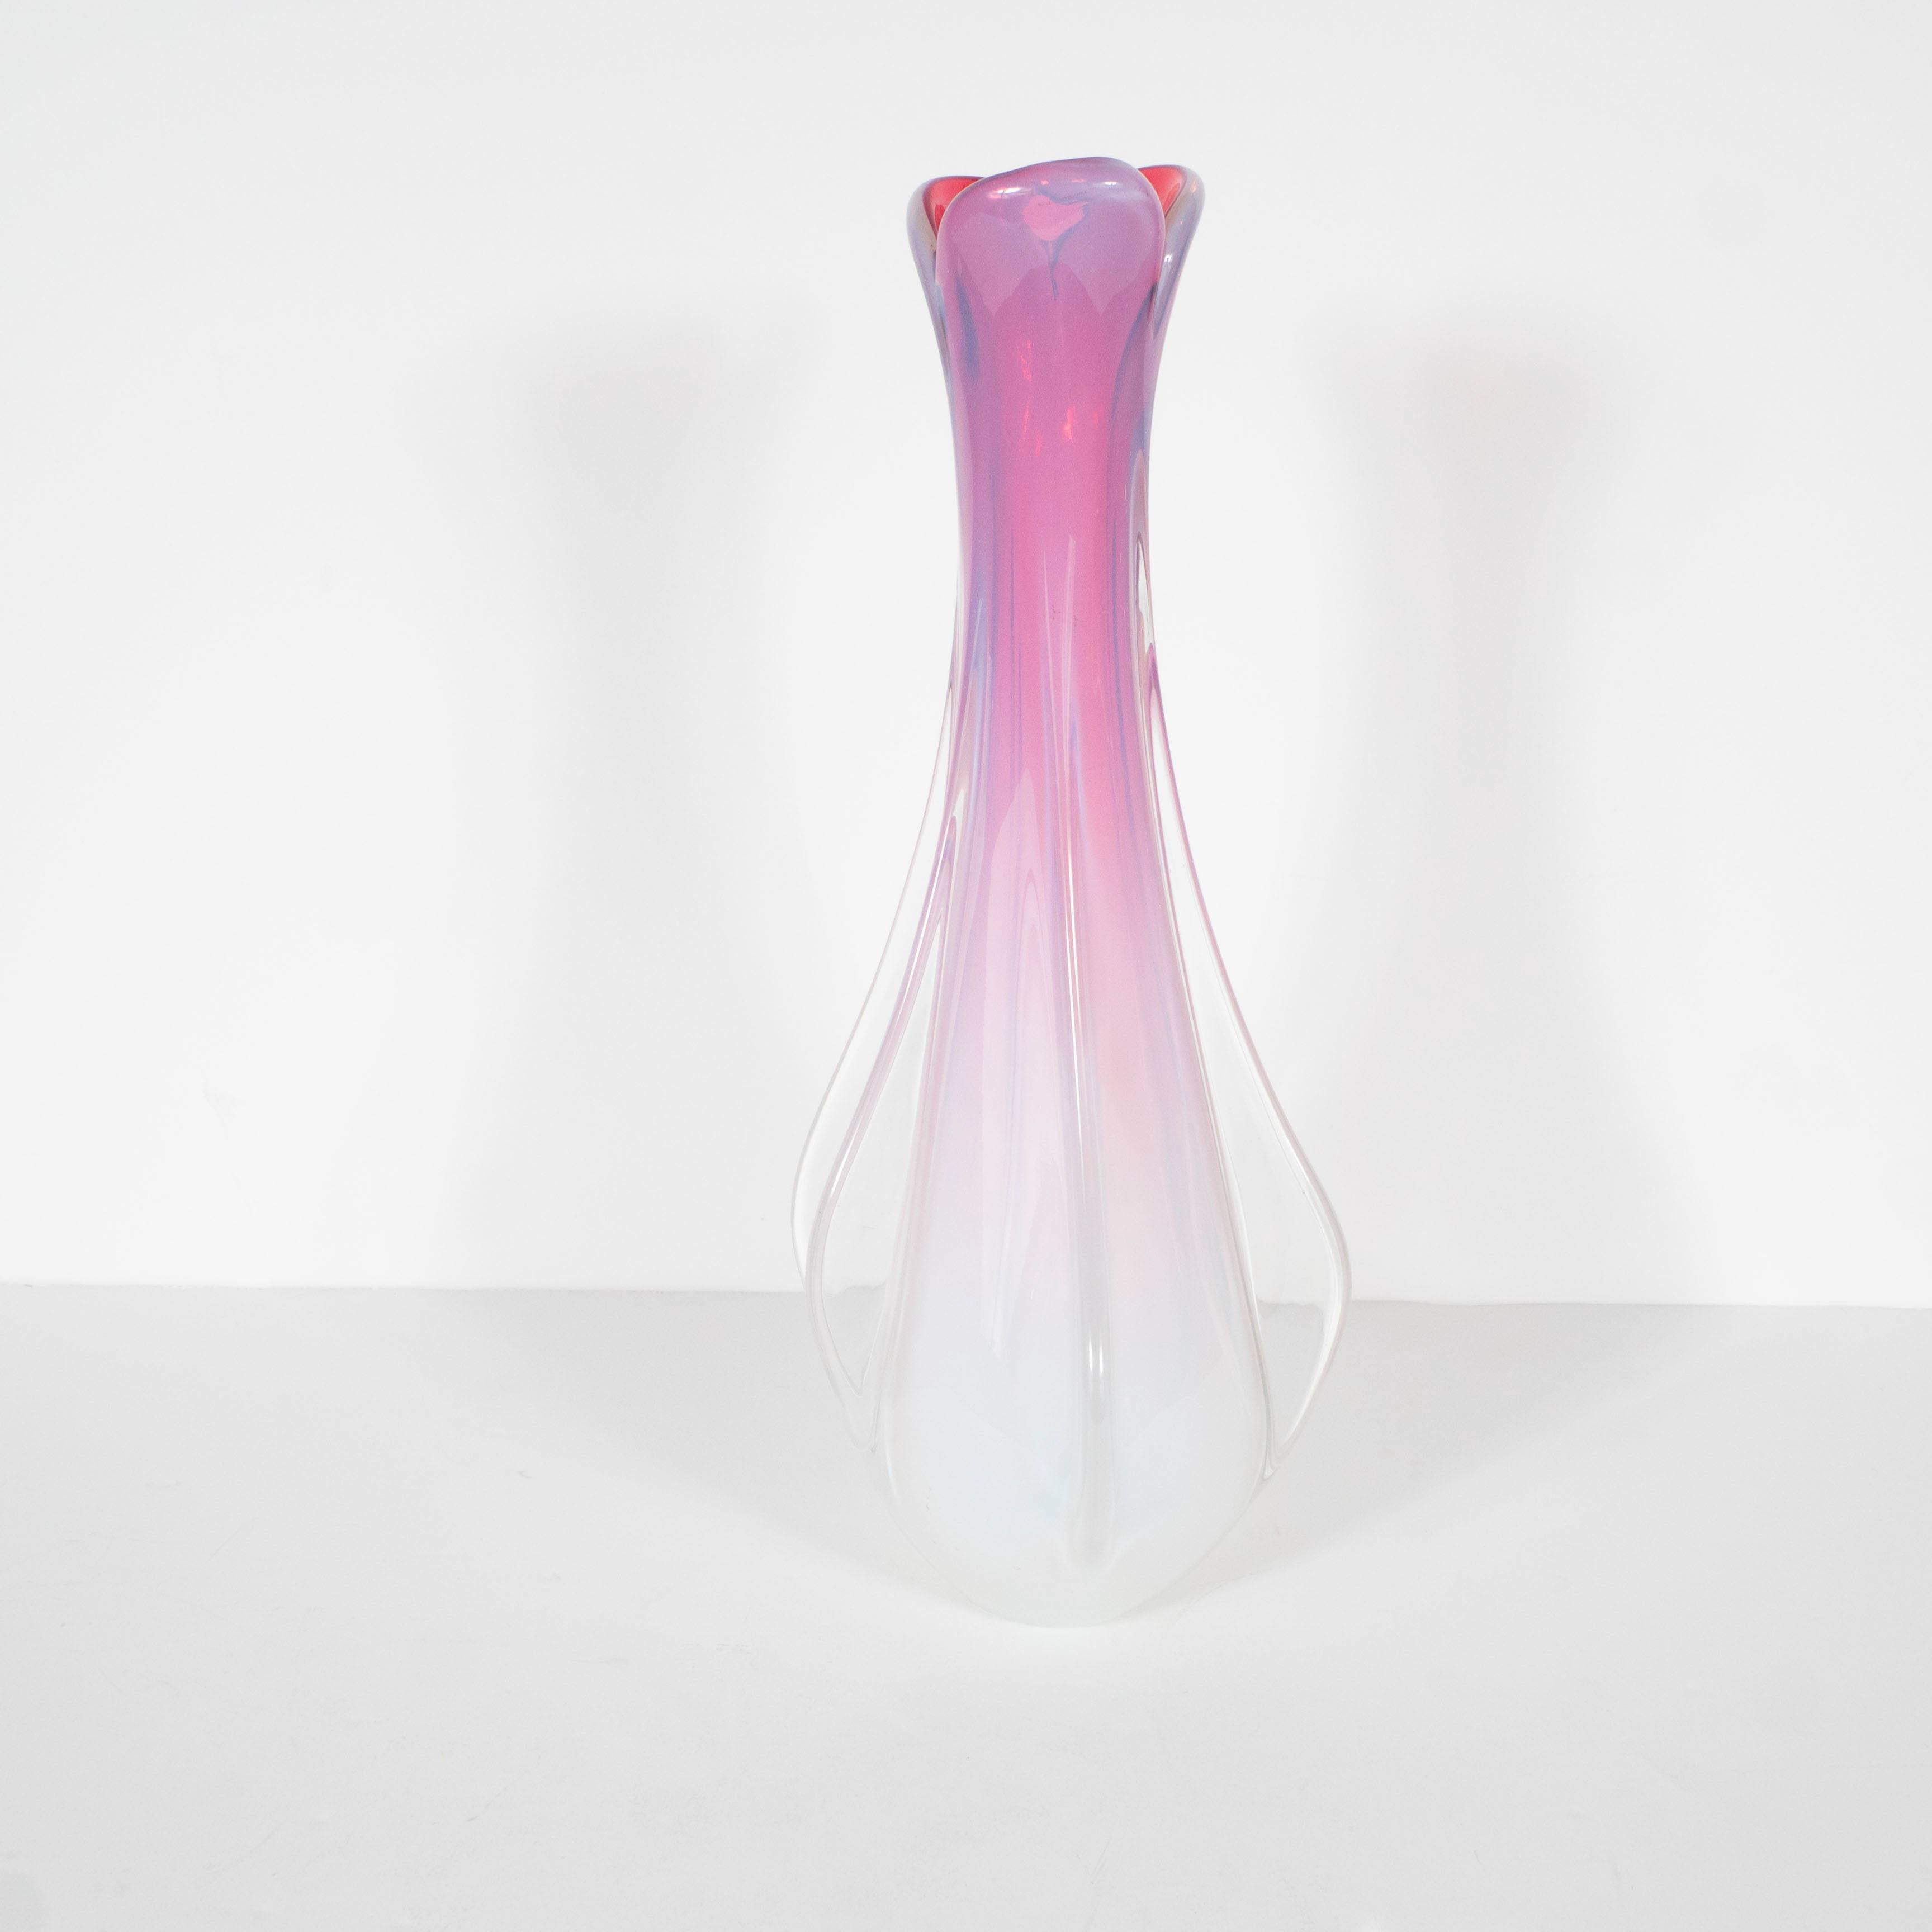 Blown Glass Mid-Century Handblown Murano Glass Vase in Ombre Tones of Rose and Chambord